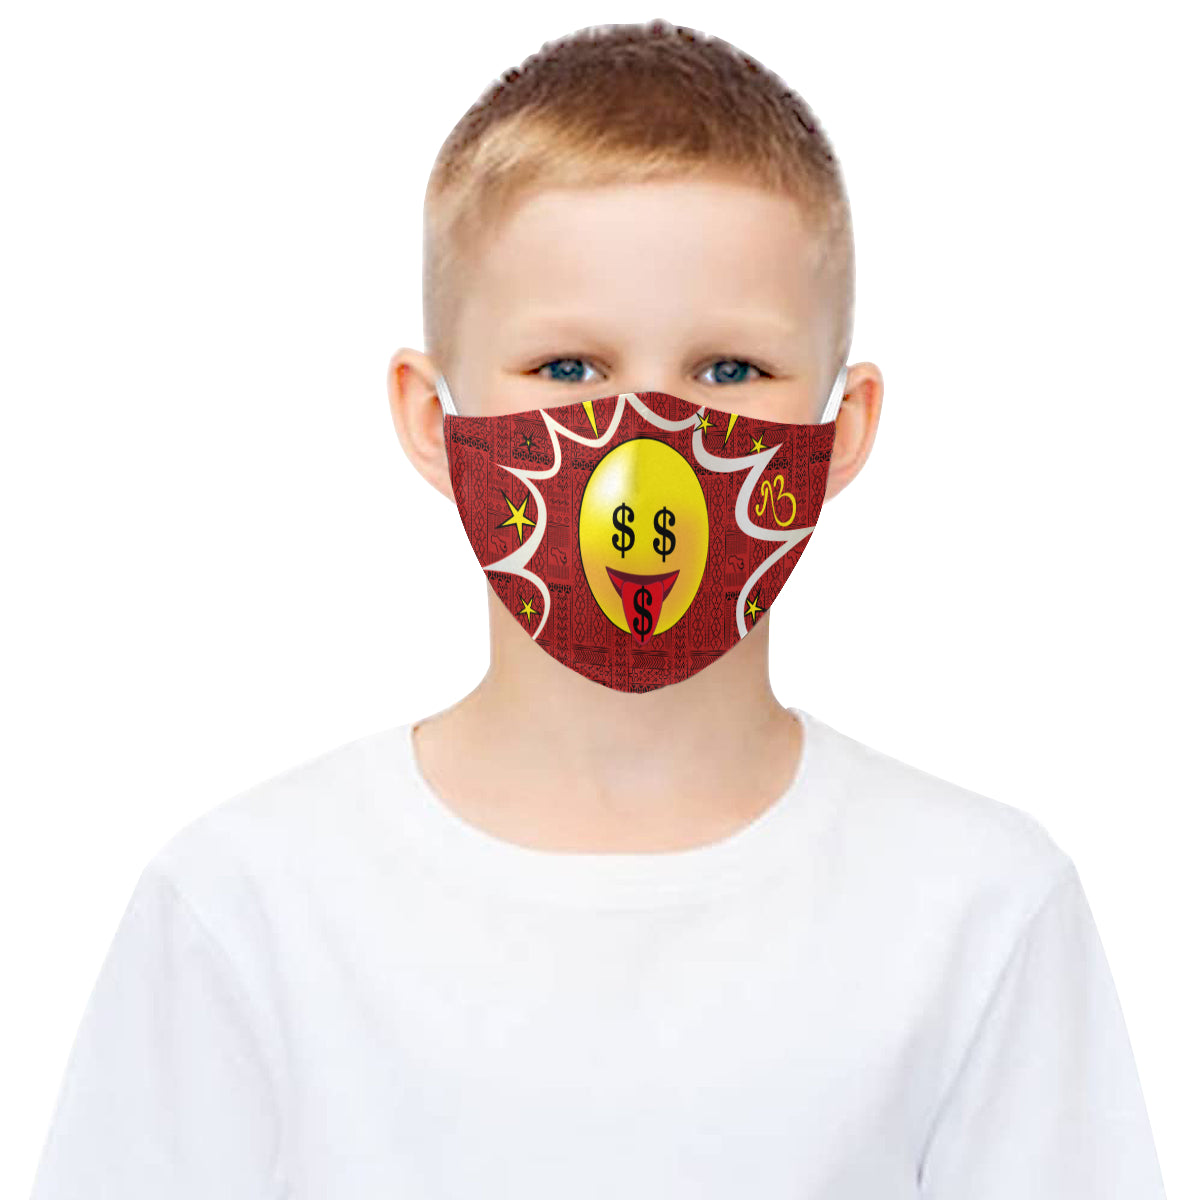 Like a Bawse! Tribal Print Comic Emoji Cotton Fabric Face Mask with Filter Slot and Adjustable Strap - Non-medical use (2 Filters Included)